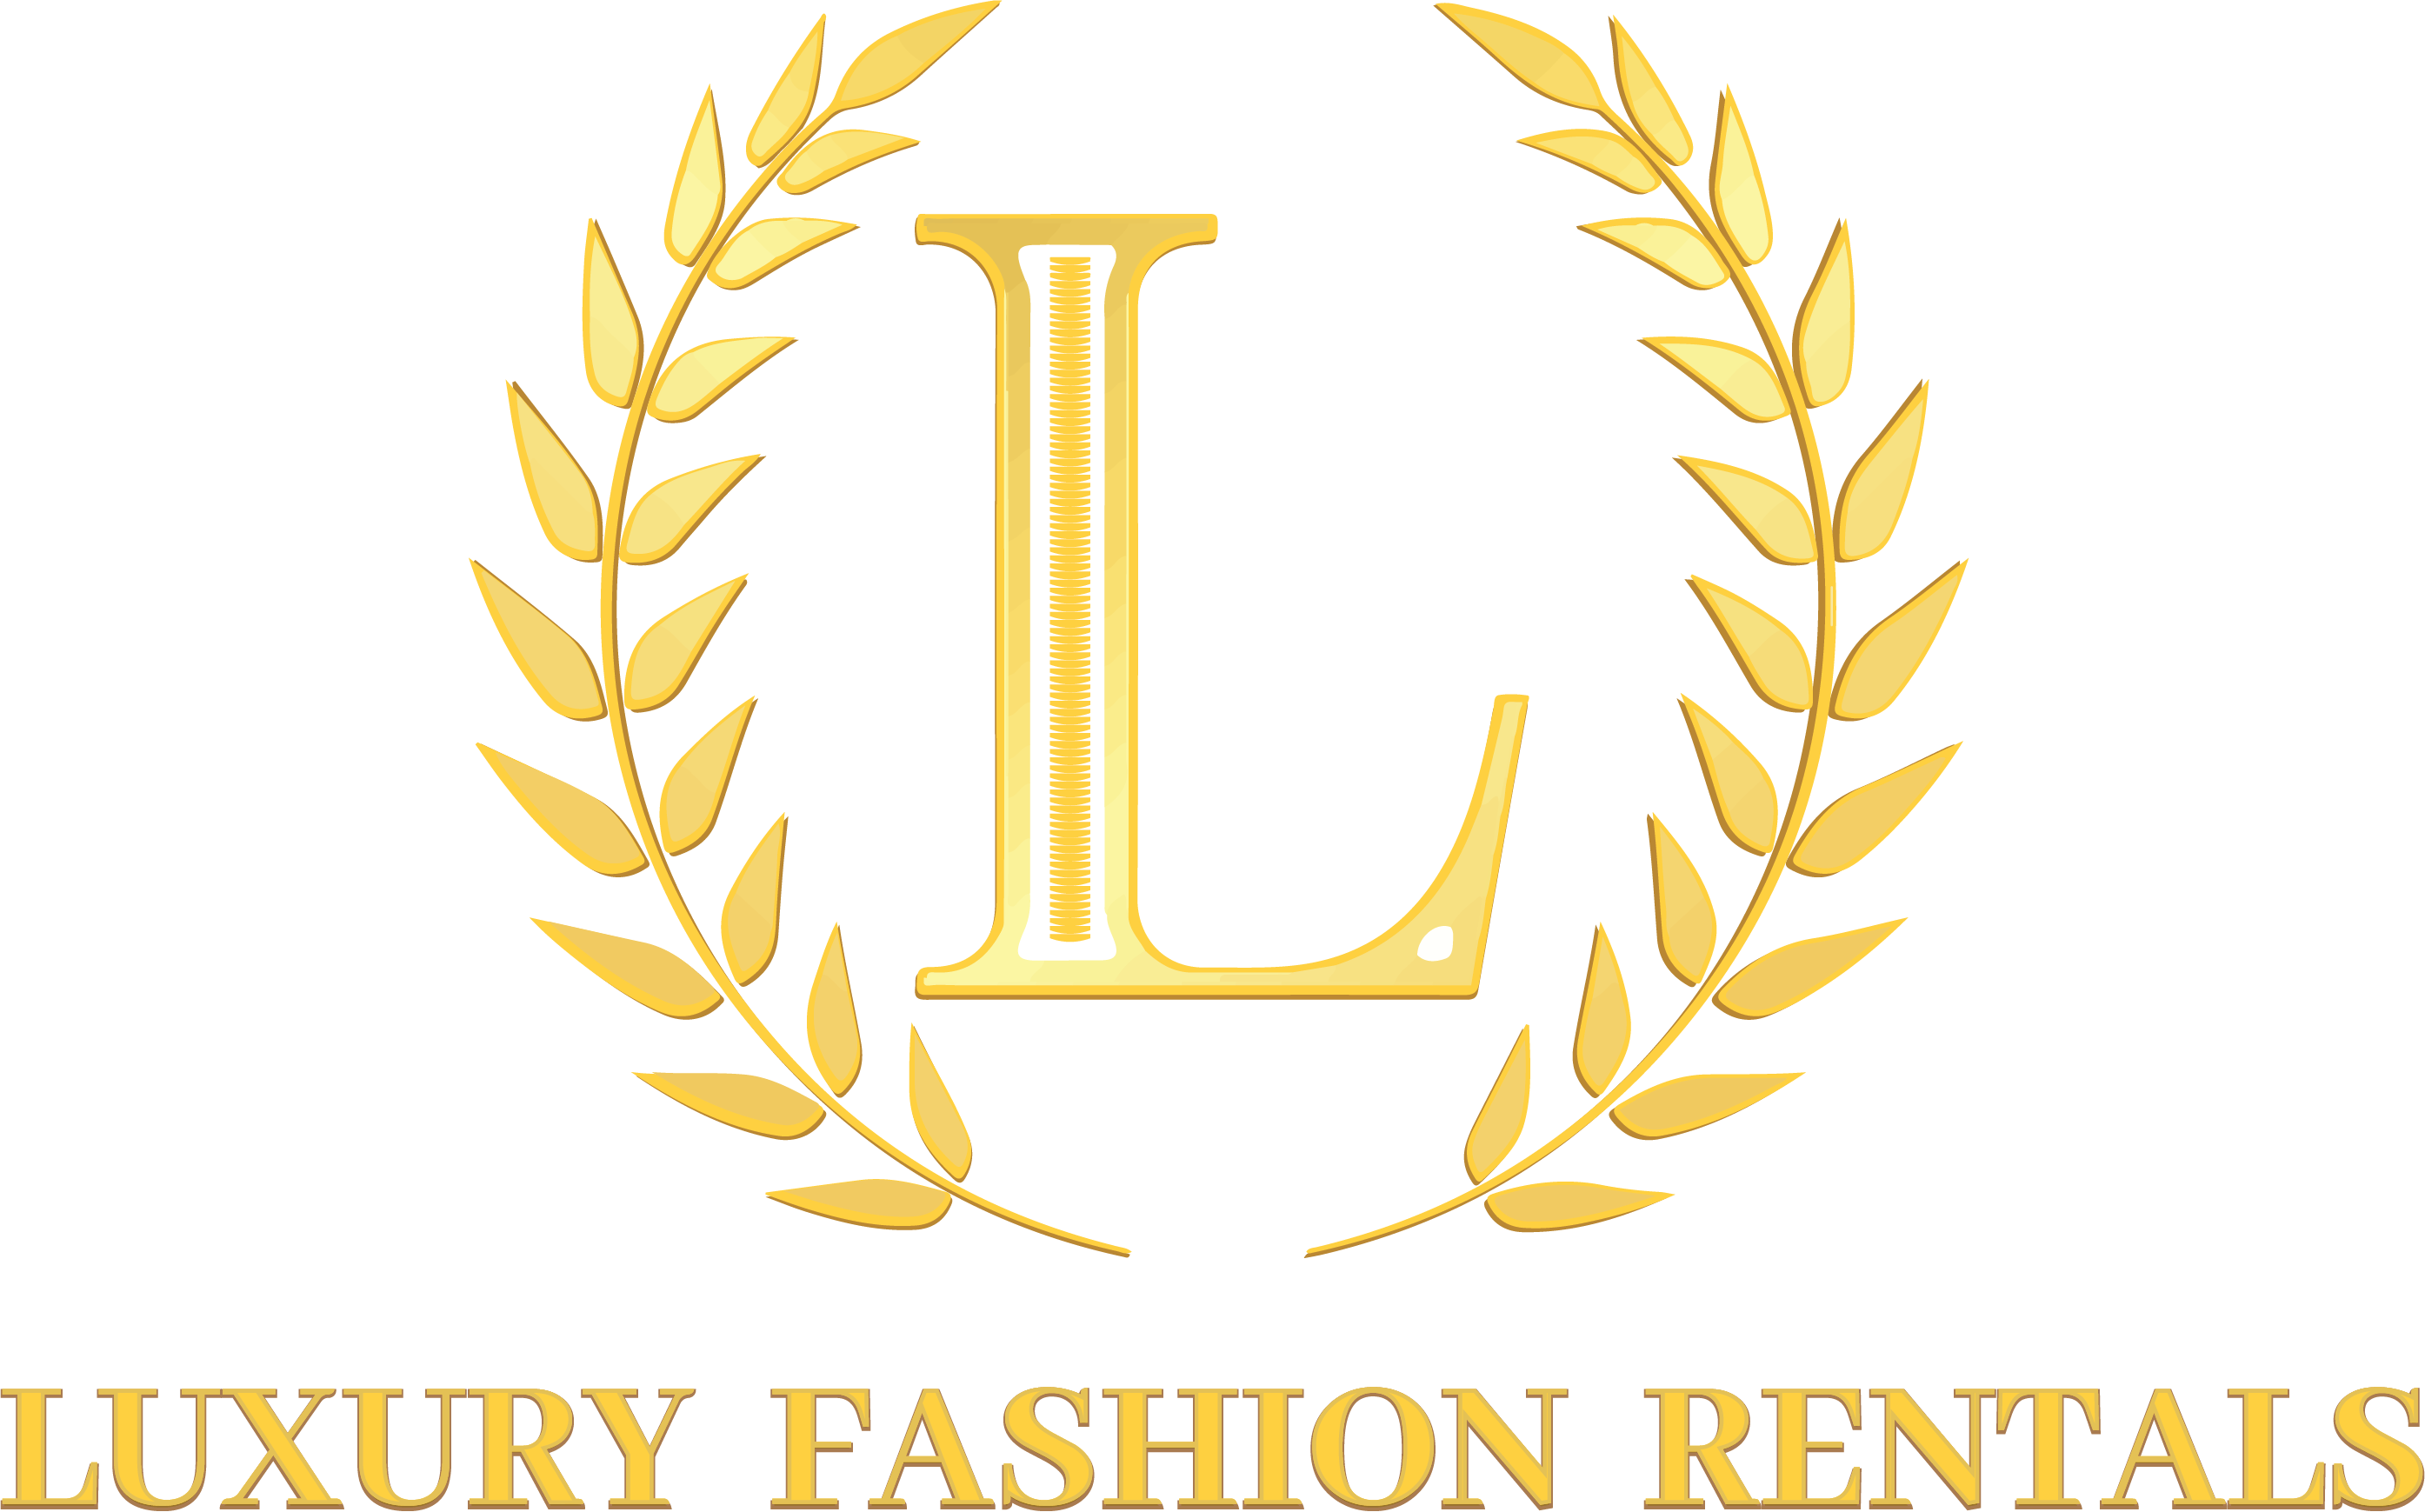 Luxury Fashion Rentals, Wednesday, March 18, 2020, Press release picture